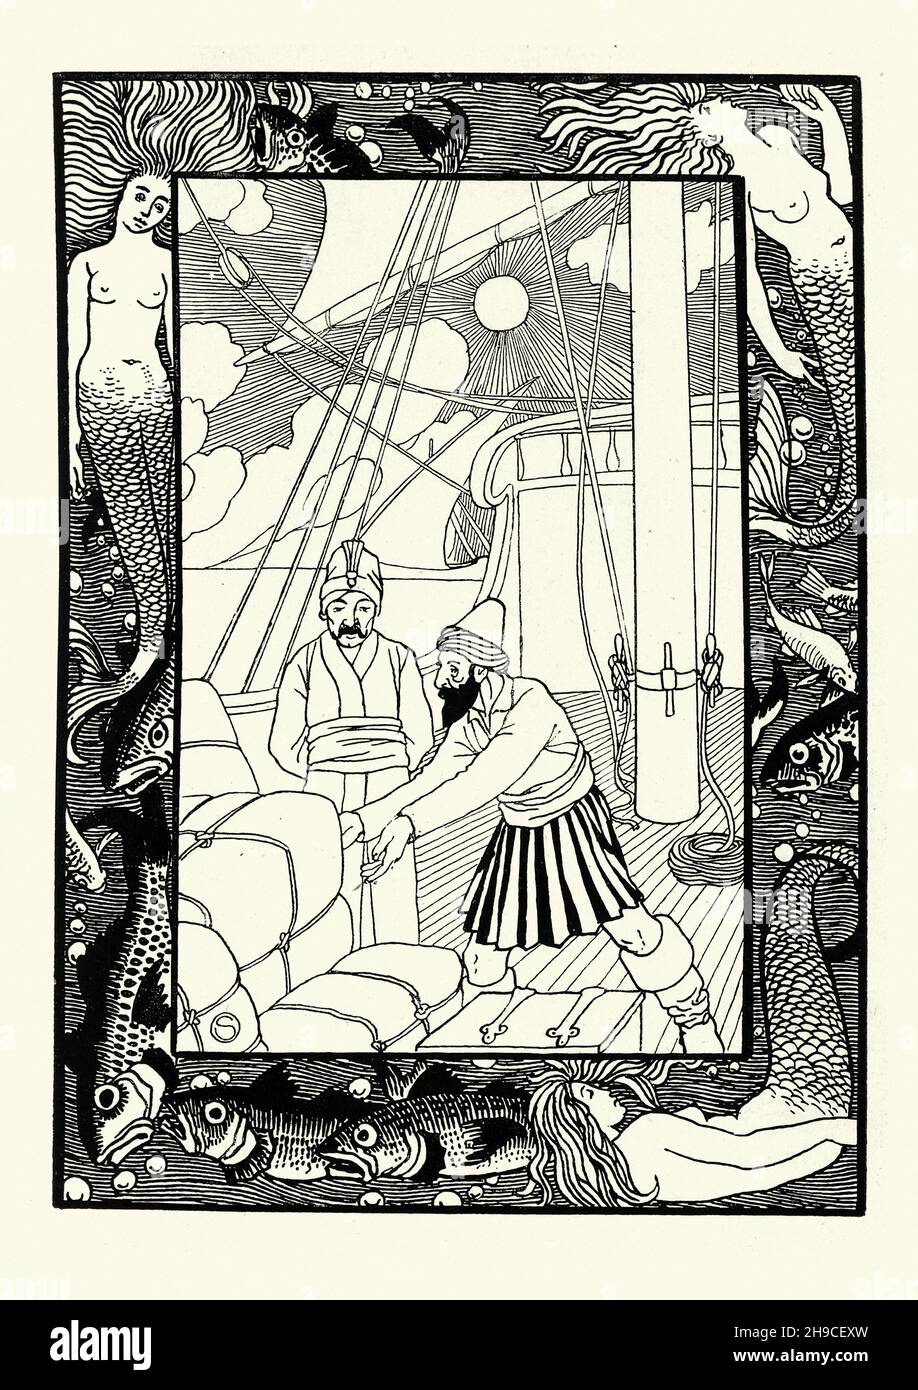 Vintage illustration from Second voyage of Sinbad the Sailorm Mermaids, Fish. William Strang Stock Photo